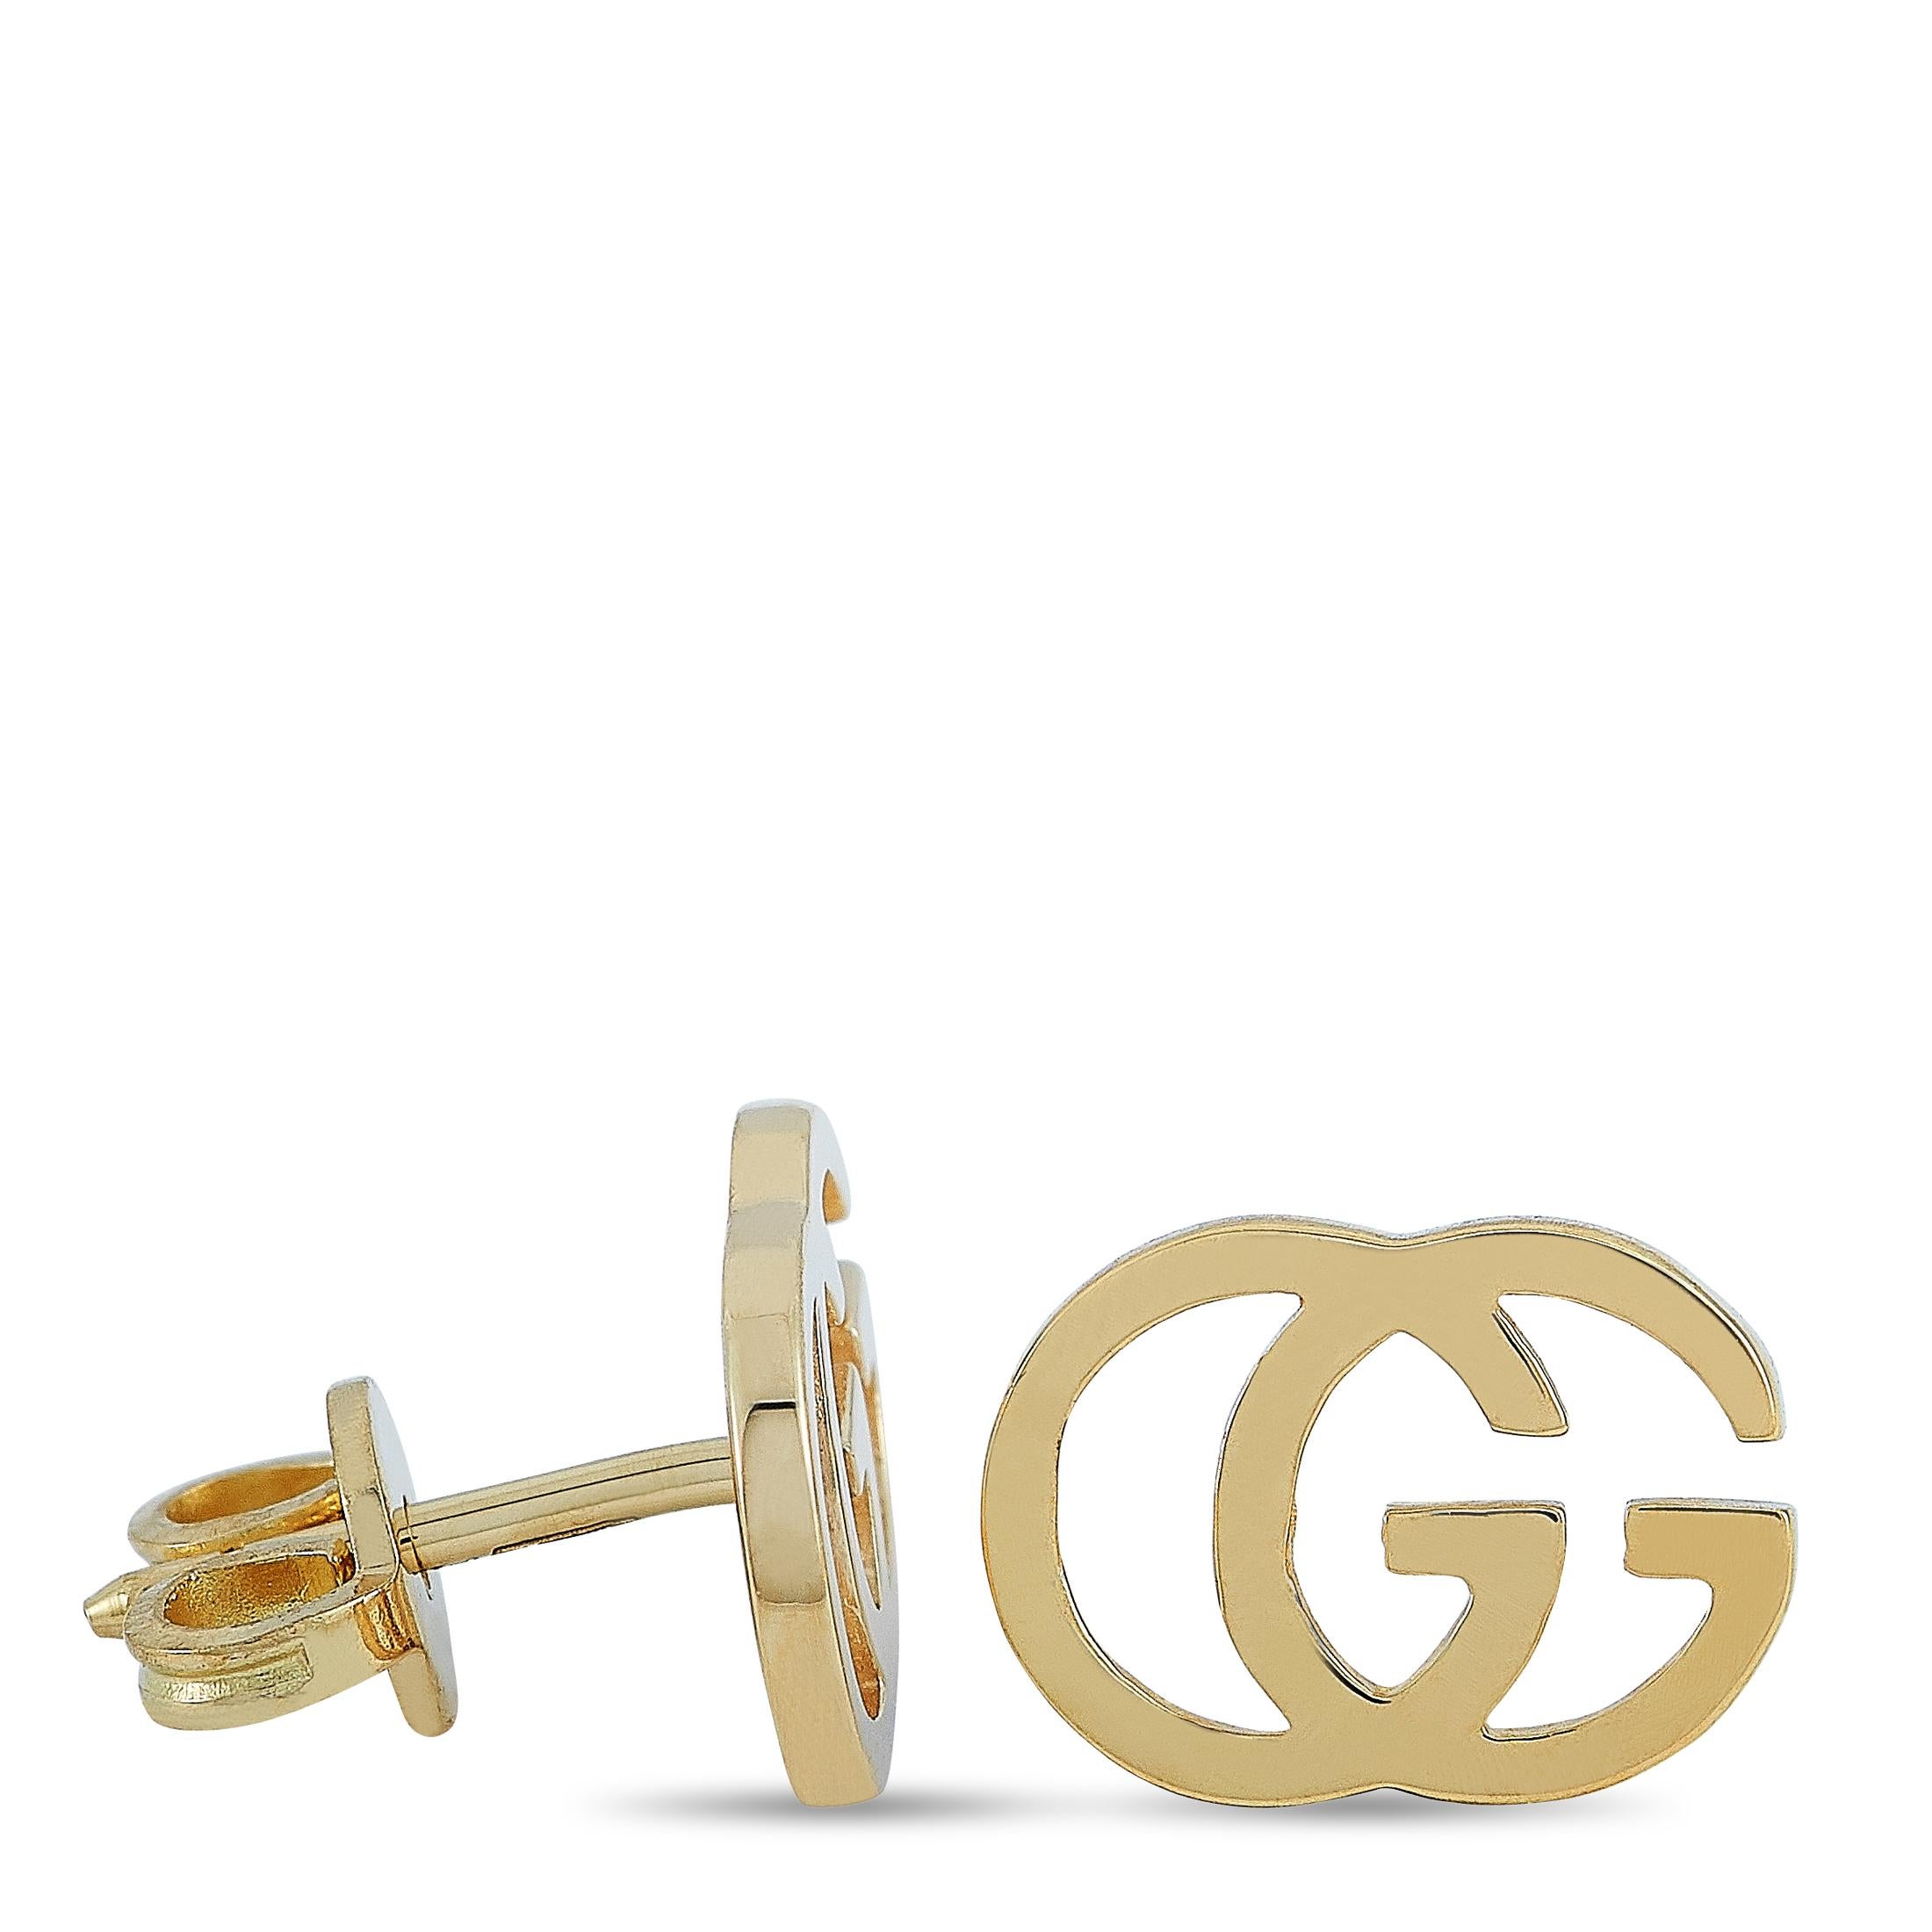 The Gucci “GG Running” earrings are crafted from 18K yellow gold and each weighs 1.1 grams. The earrings measure 0.25” in length and 0.37” in width.

The pair is offered in brand new condition and includes the manufacturer’s box and papers.